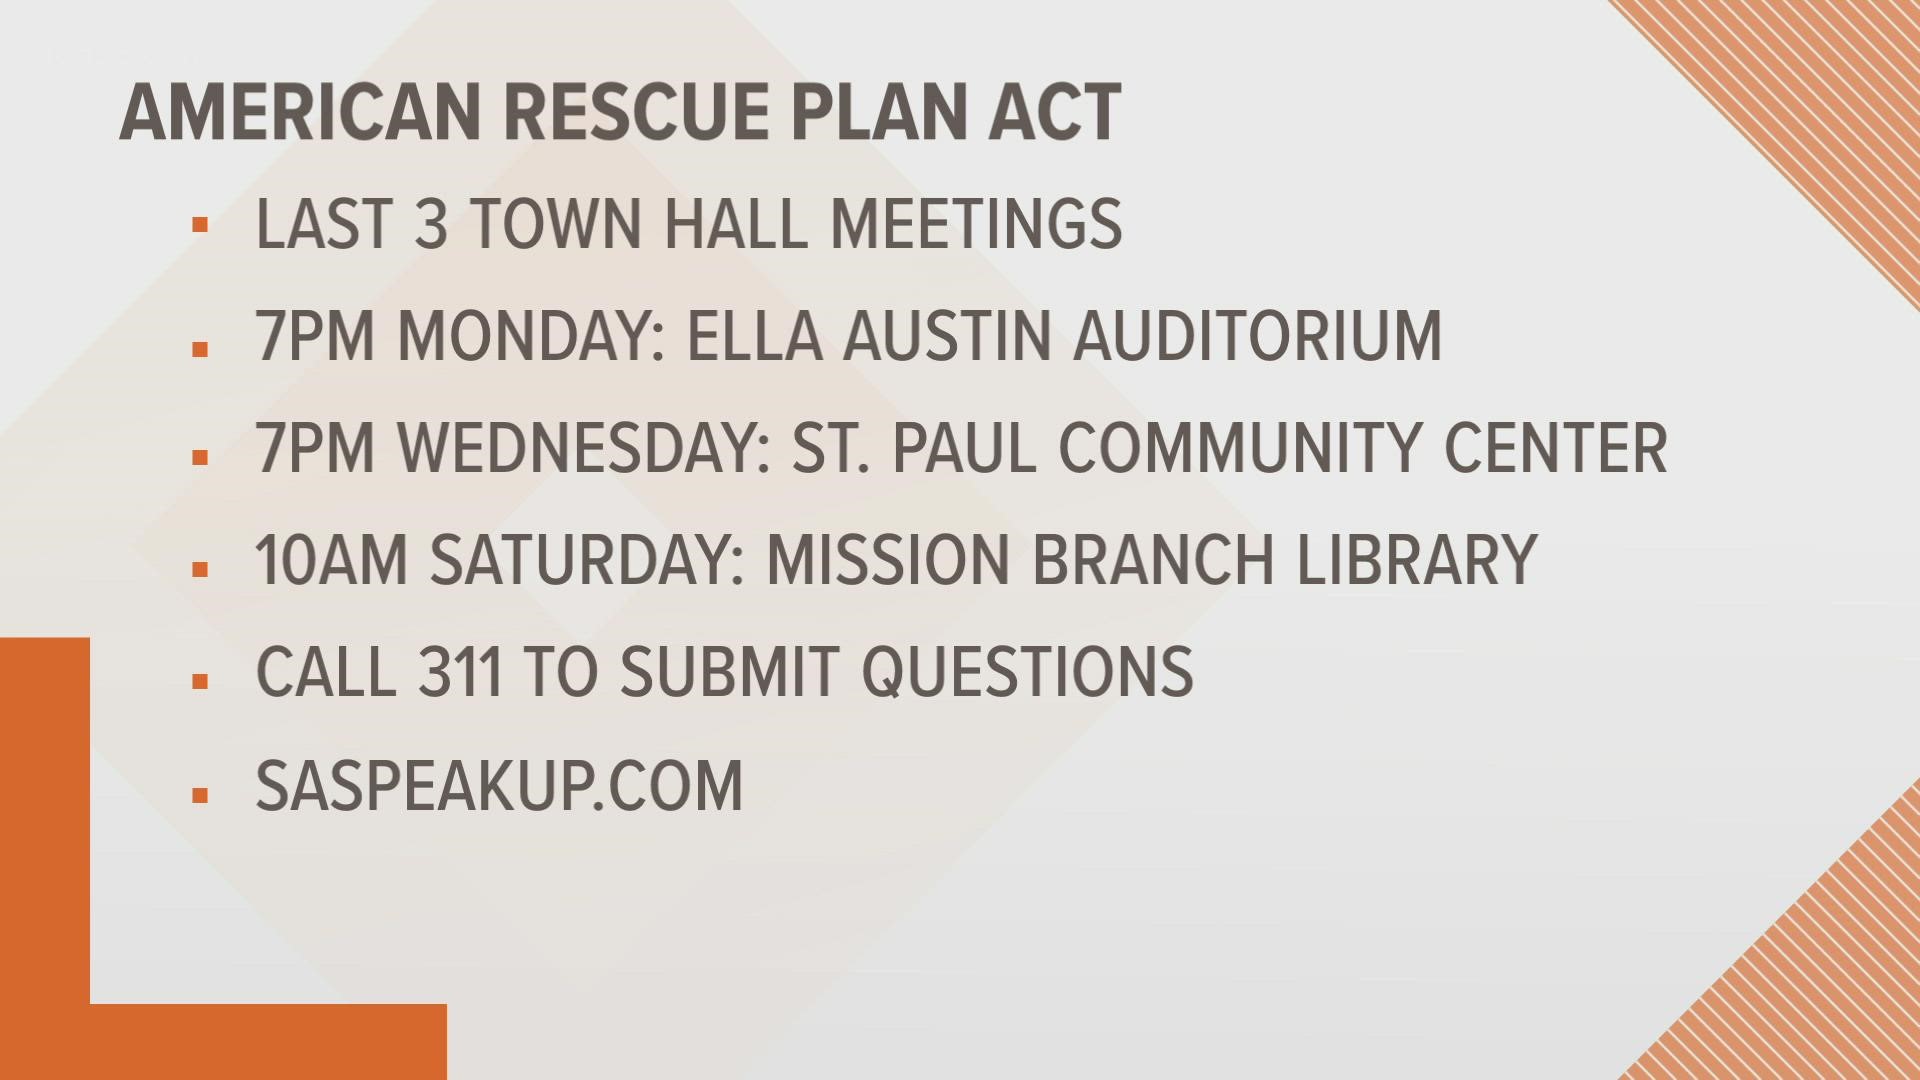 Under the American Rescue Plan Act, San Antonio was awarded nearly $327 million.